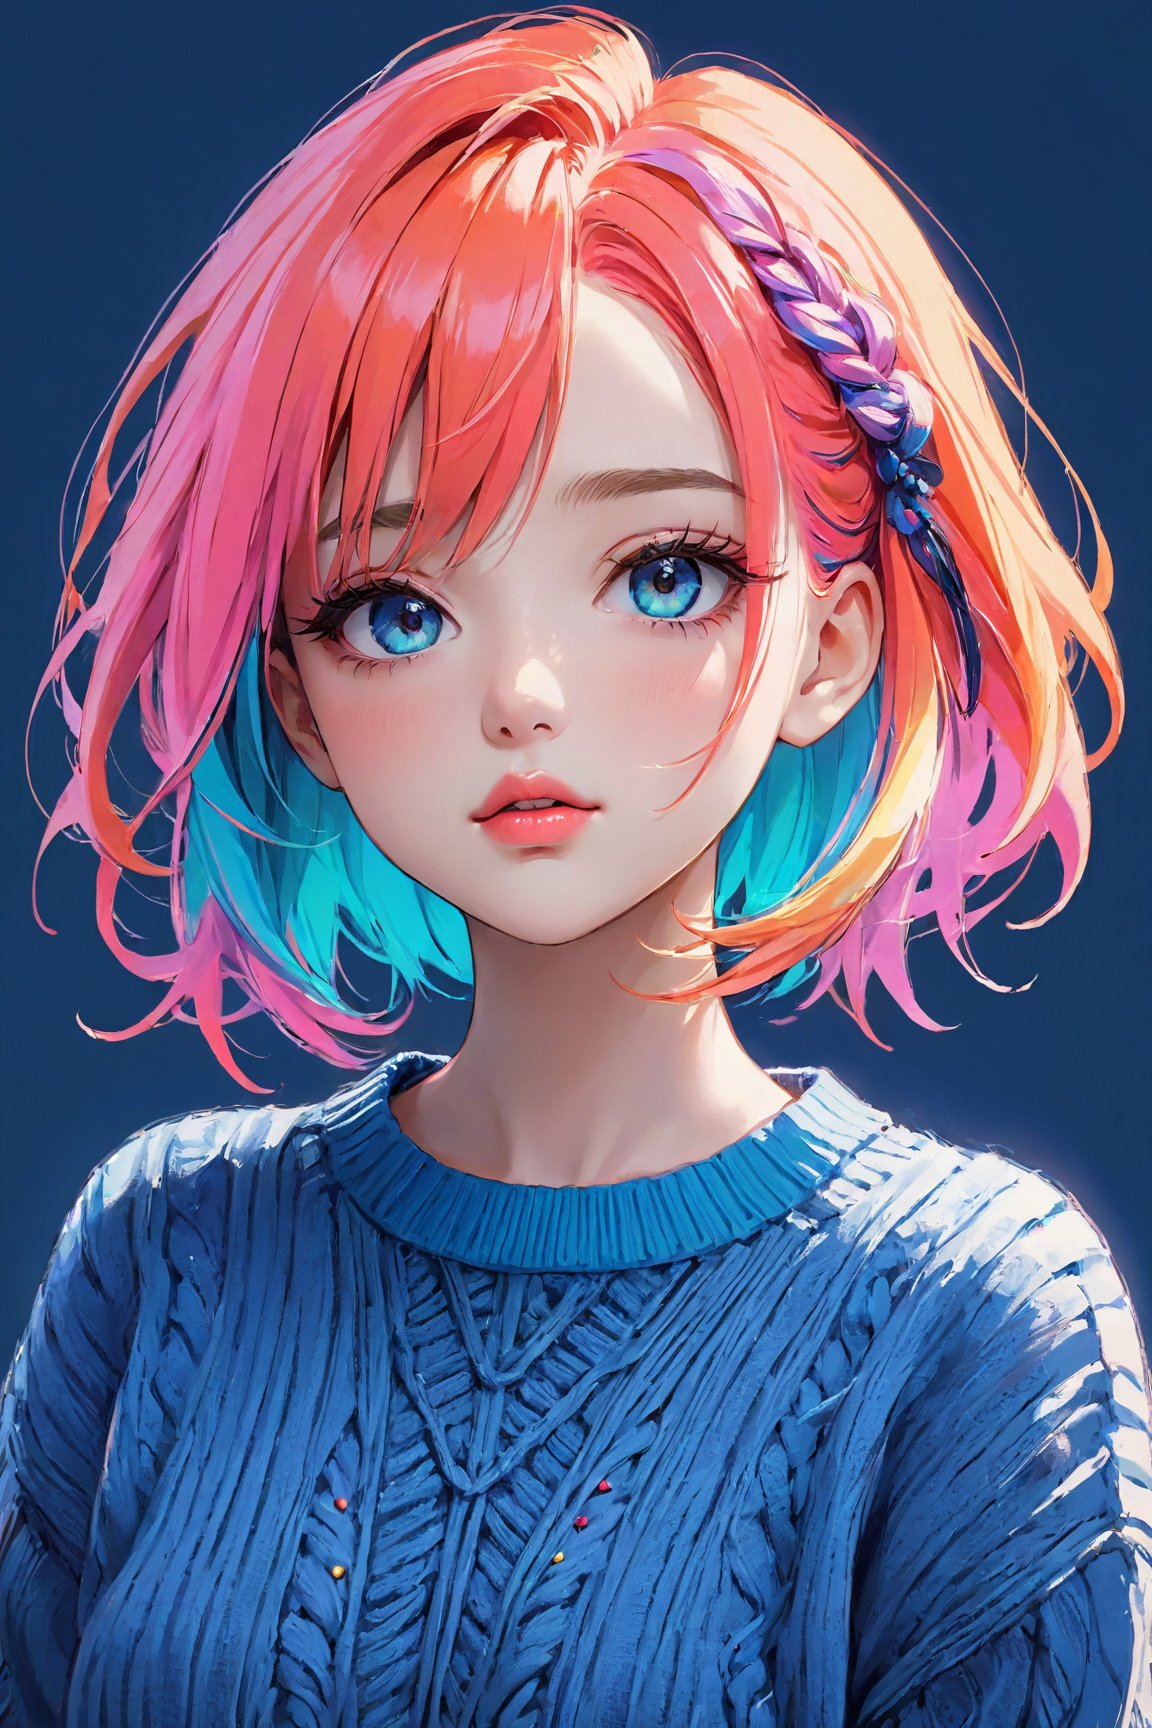 (best quality,realistic,anime:1.2),sketch,lip,beautiful detailed eyes,beautiful detailed lips,extremely detailed eyes and face,long eyelashes,strong expressions,soft touch,expressive poses,1girl,modern outfit,stylish clothes,neon hair,artistic brushstrokes,clean lines,vibrant colors,contrast,highlights,shadows,blue gradient background,texture,embroidered sweater,chic style,dynamic composition,interesting angle,textured crop,fashionable,cool vibes